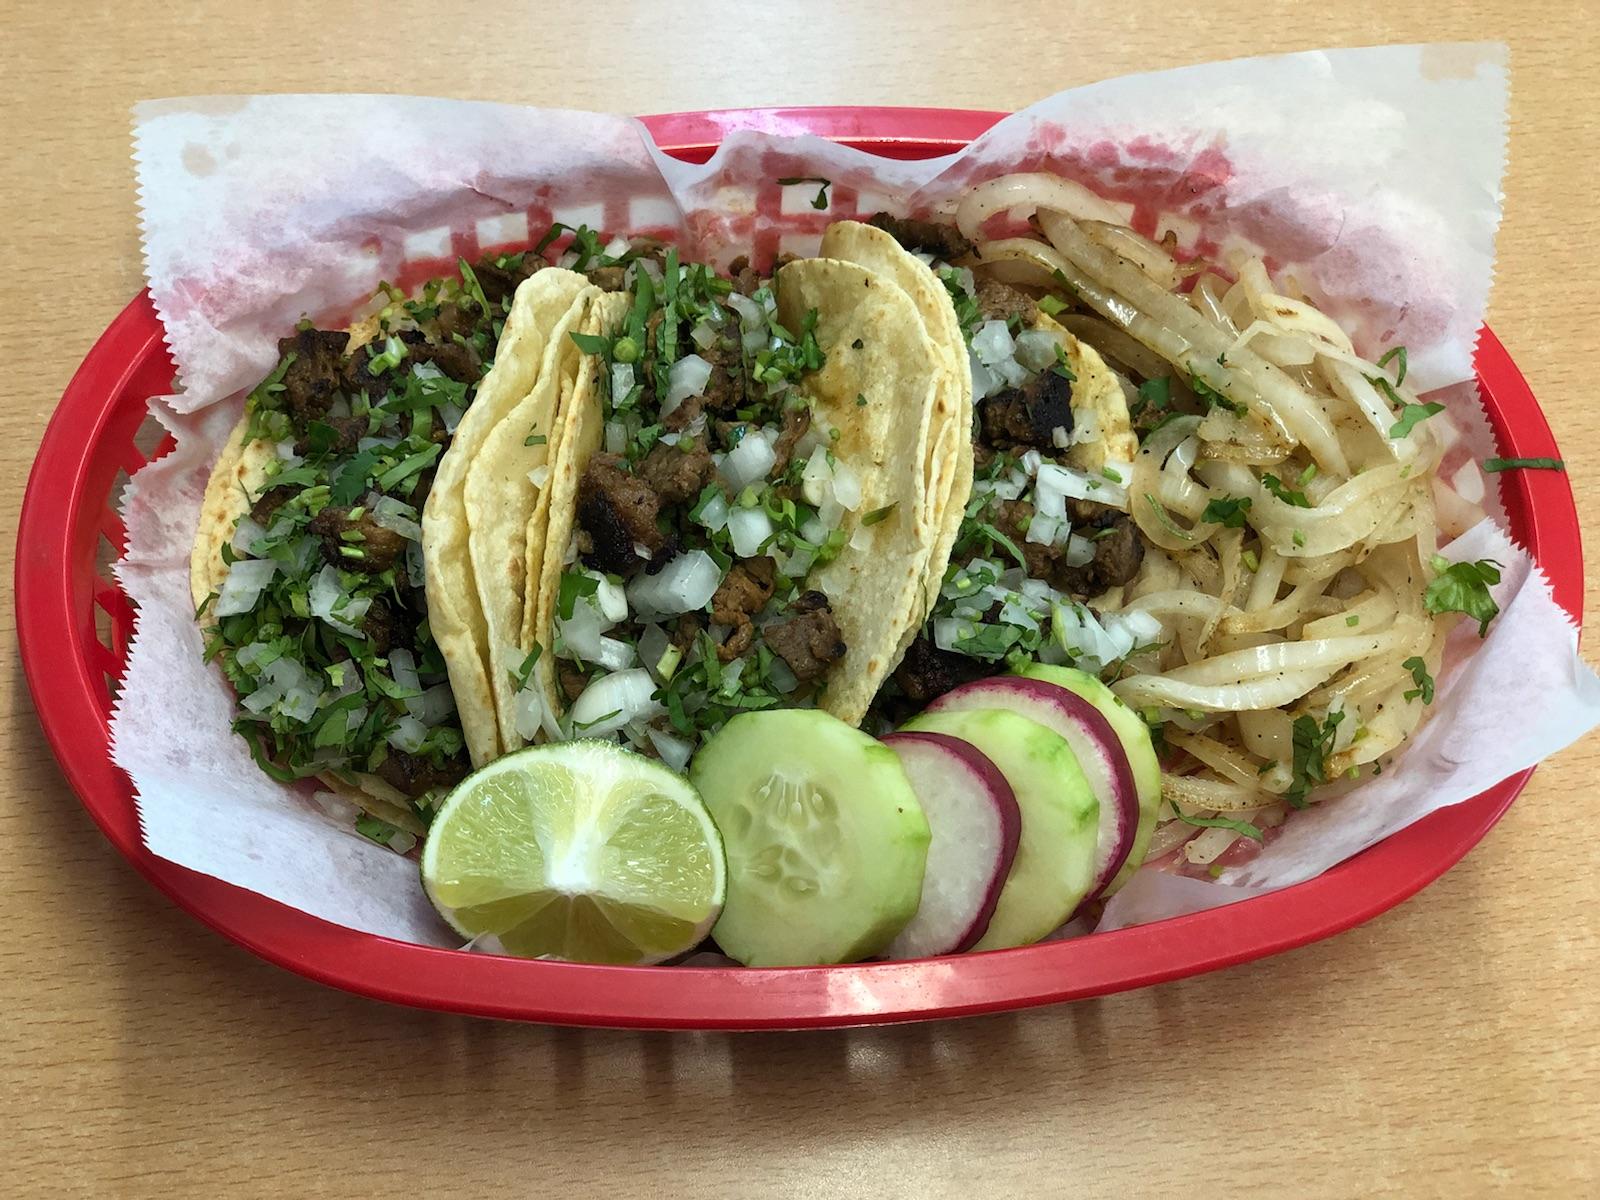 La Calle to bring street tacos to Trussville